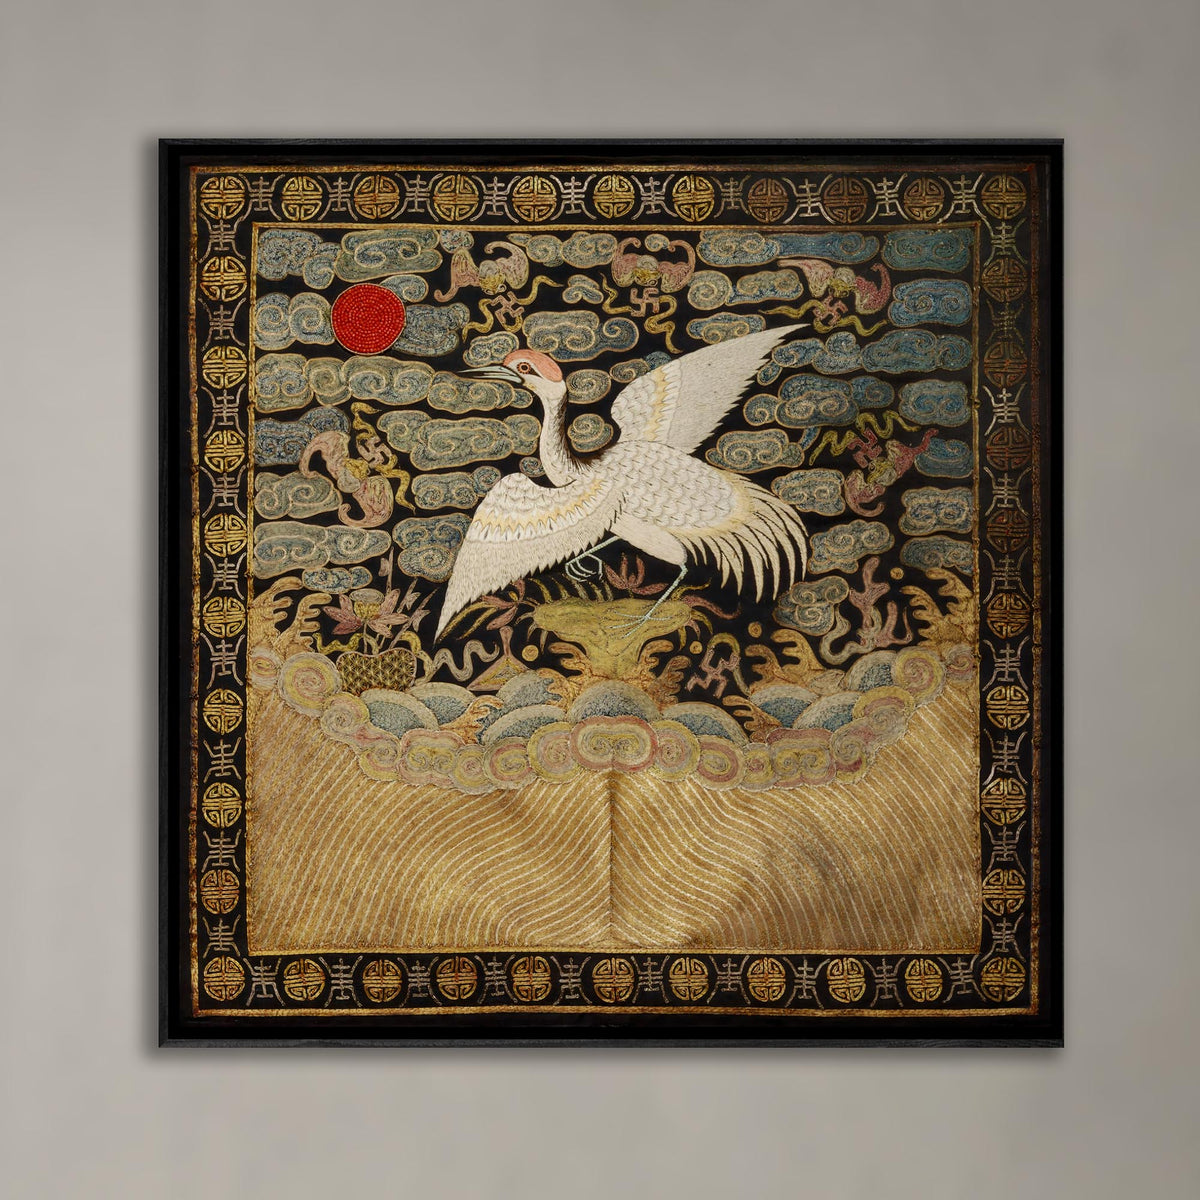 giclee 6&quot;x6&quot; Chinese Silk Embroidery Heron Bird Mandarin Square Qing Dynasty, Antique Wall Art Decor Vintage Fine Art Print